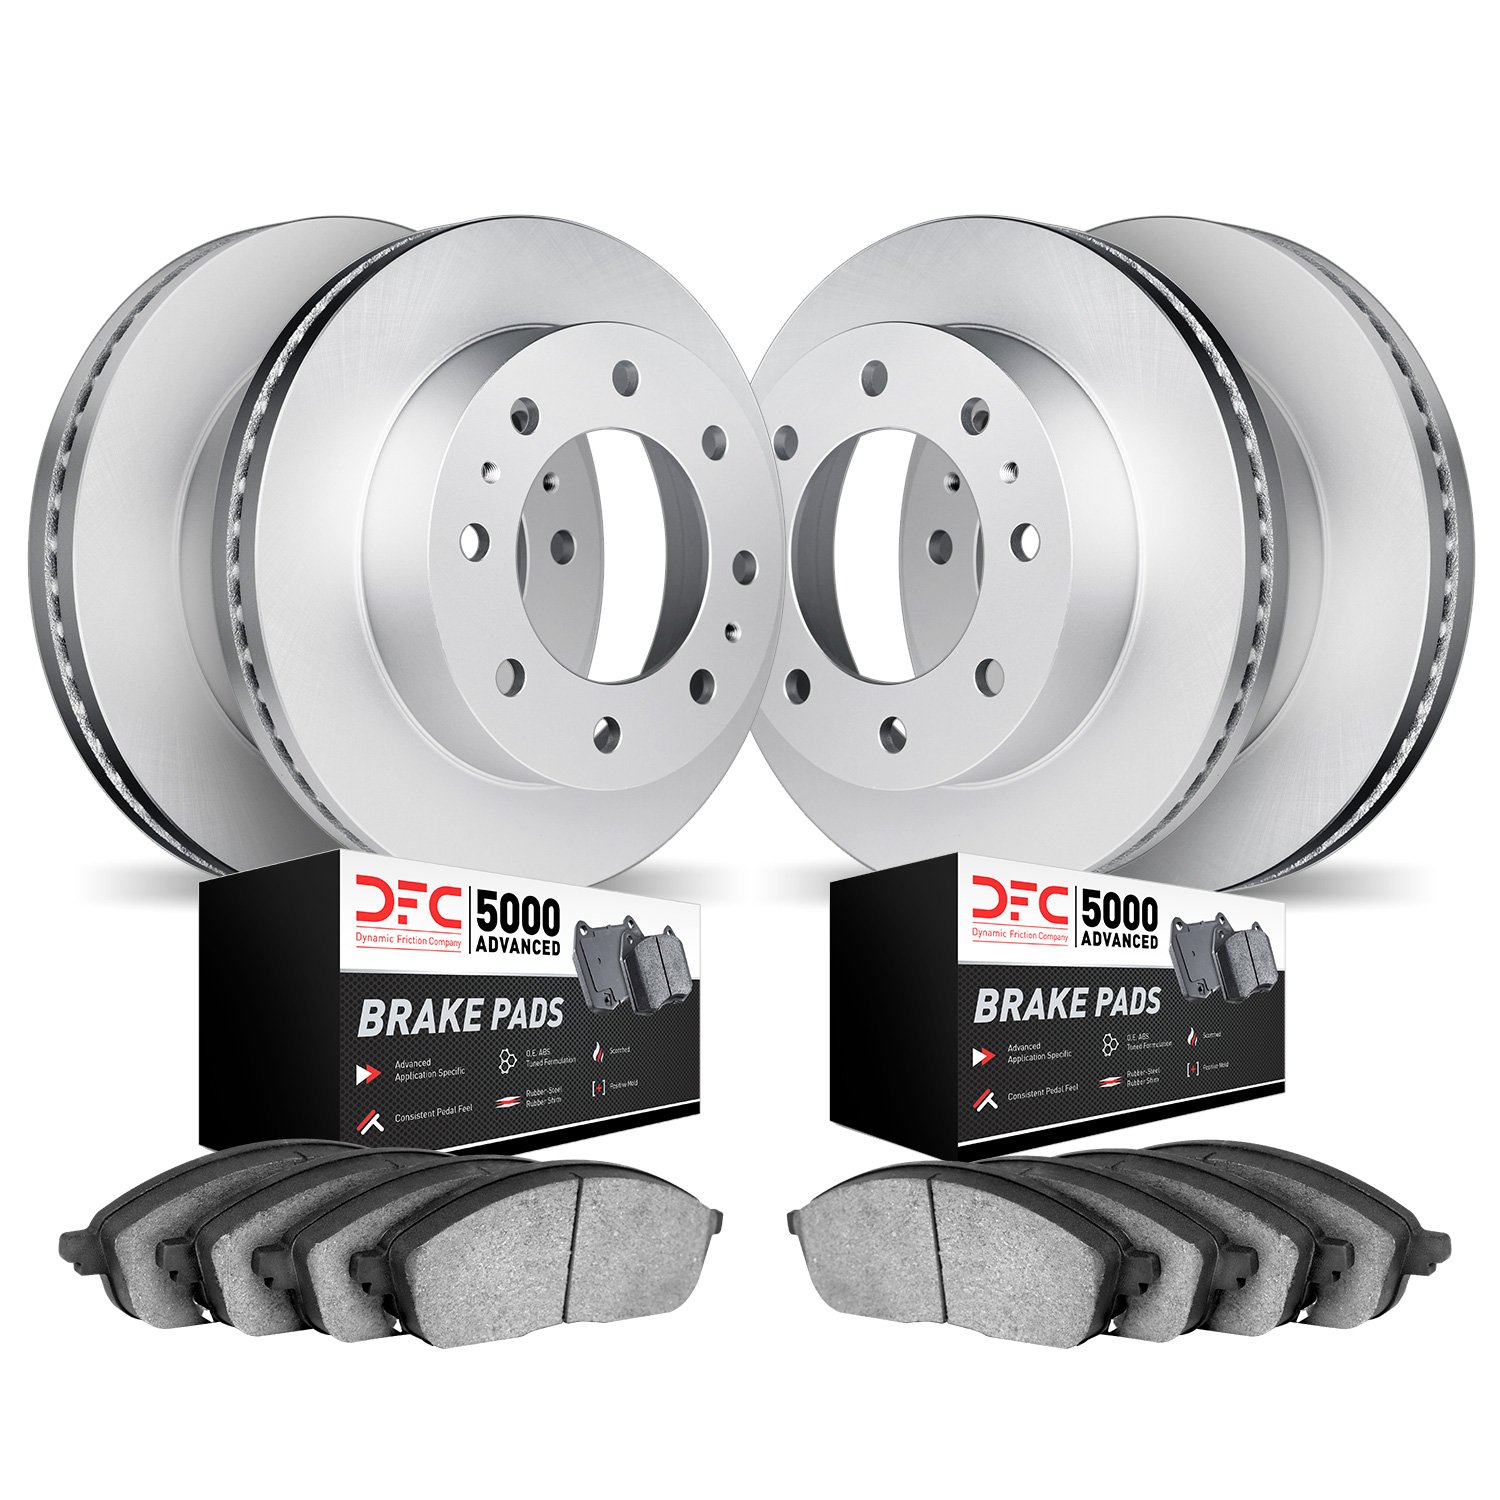 4504-54272 Geospec Brake Rotors w/5000 Advanced Brake Pads Kit, 2005-2007 Ford/Lincoln/Mercury/Mazda, Position: Front and Rear